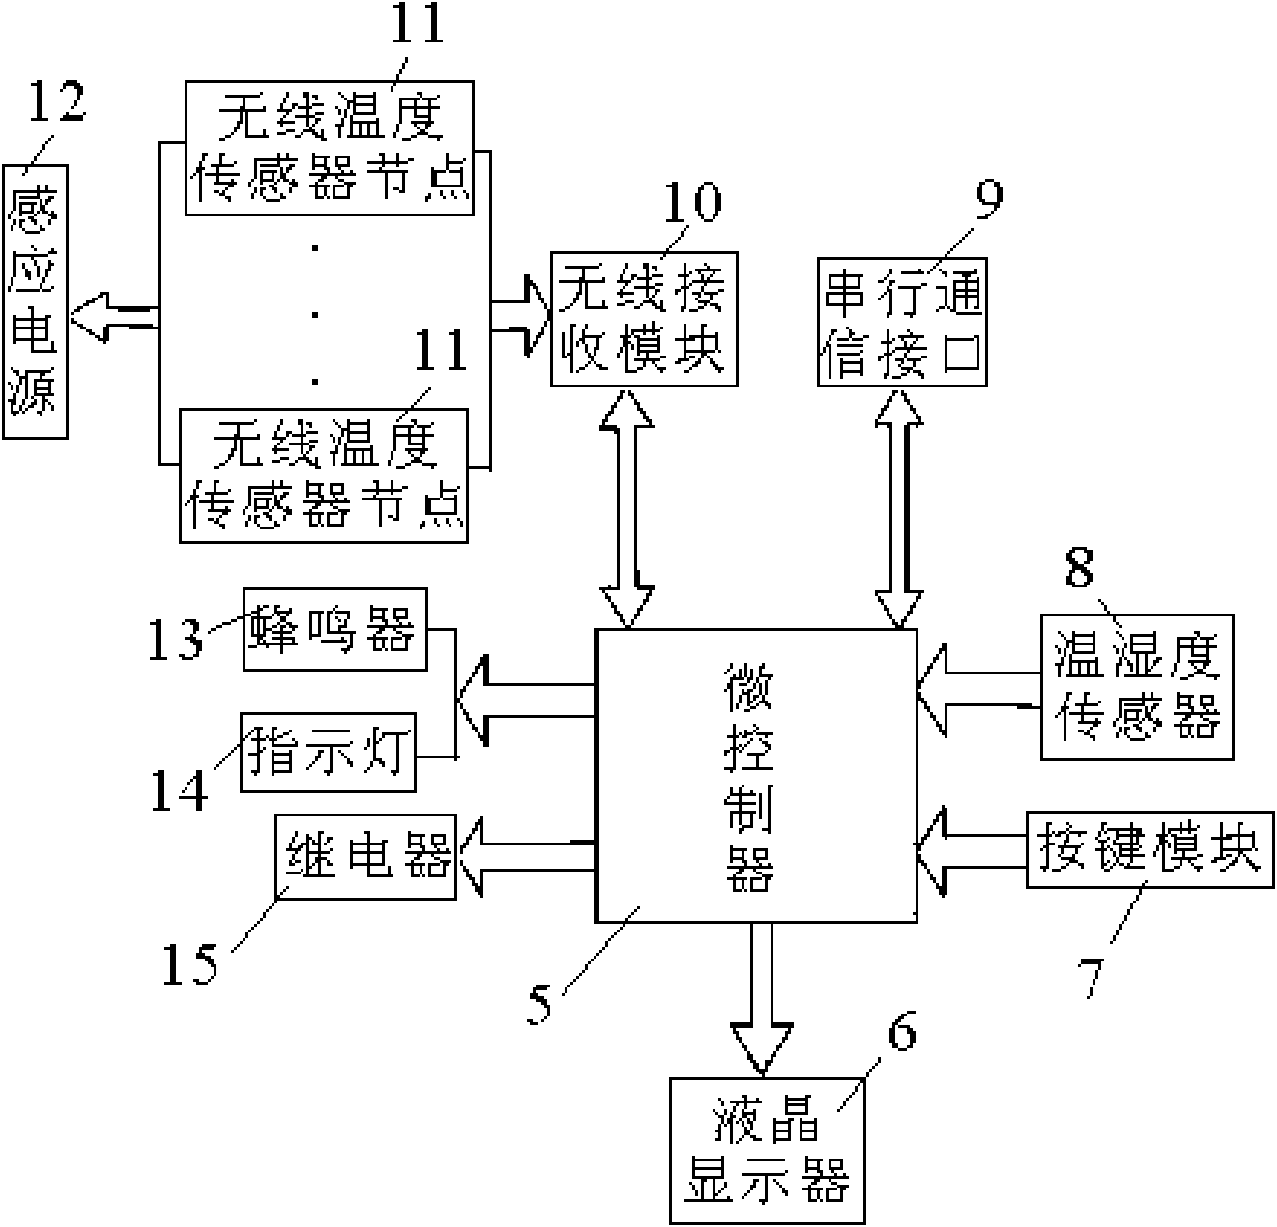 System for monitoring contact temperature of high-voltage switch cabinet on line